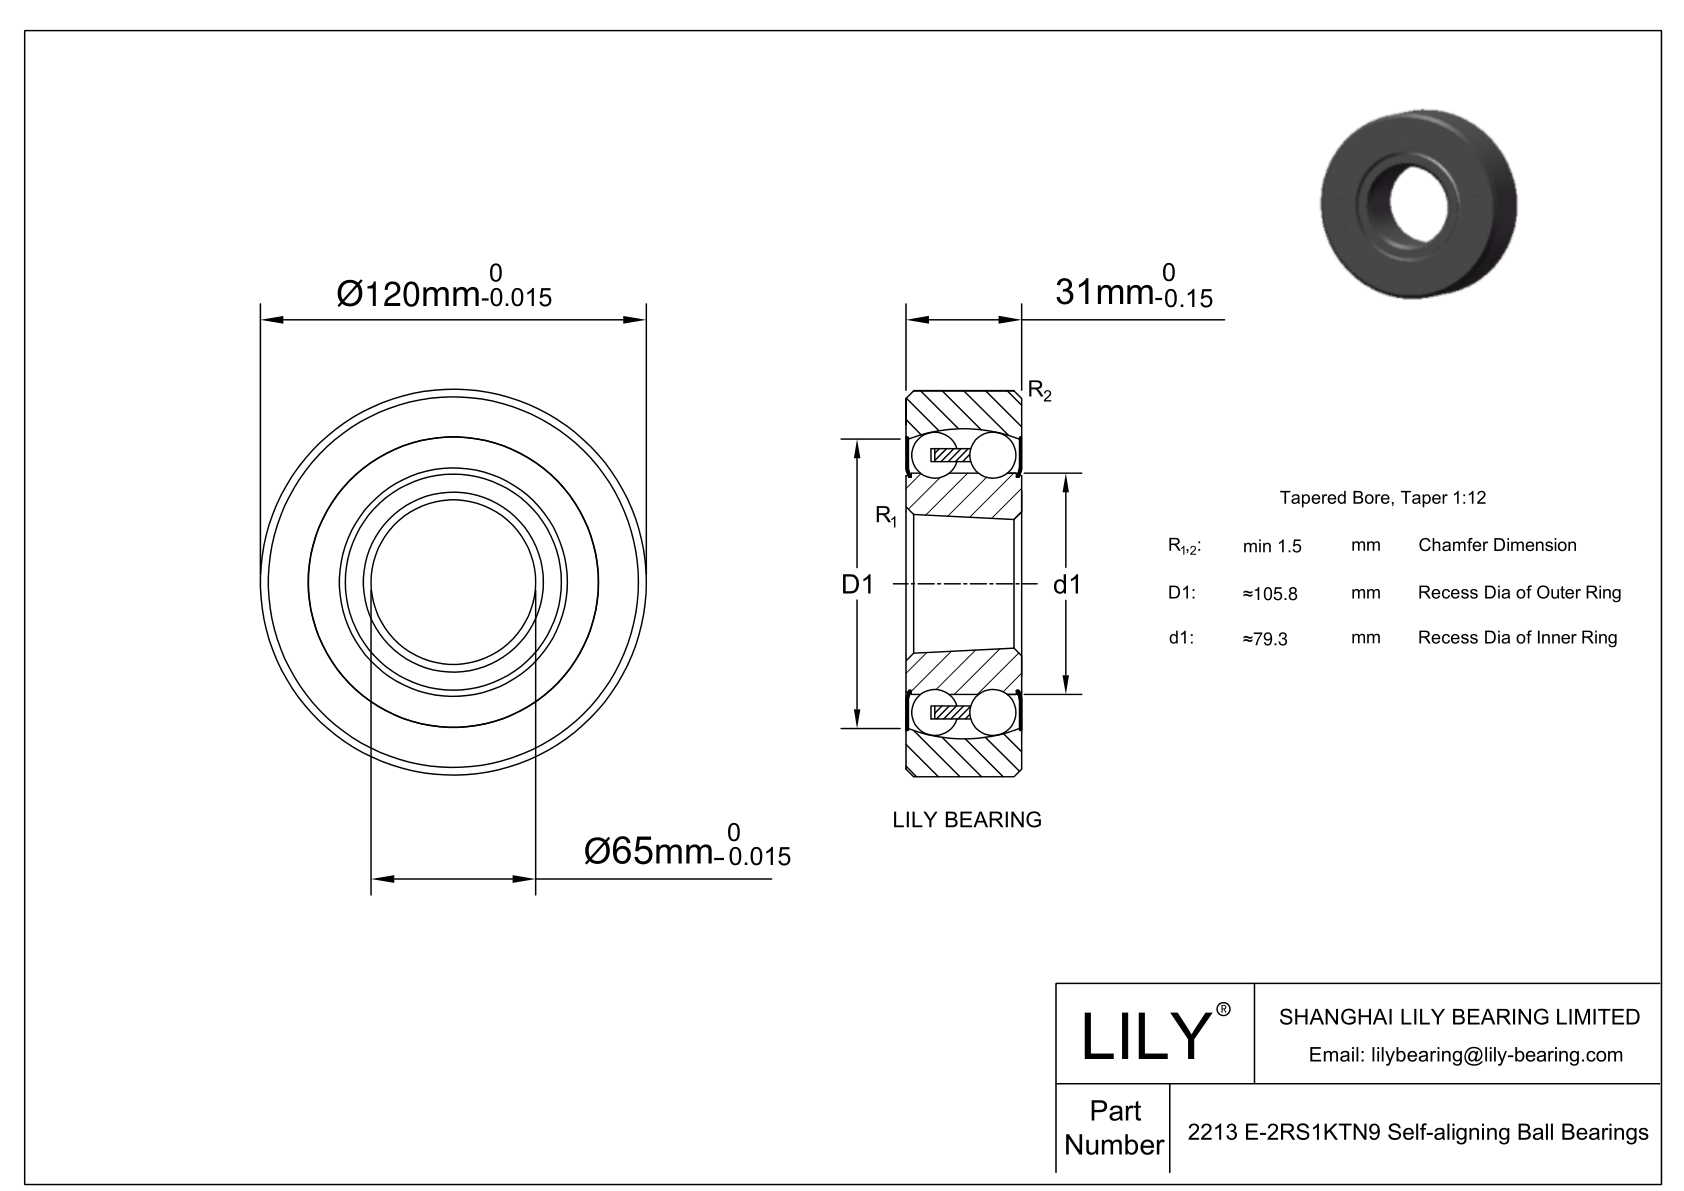 S2213 E-2RS1KTN9 Stainless Steel Self Aligning Ball Bearings cad drawing